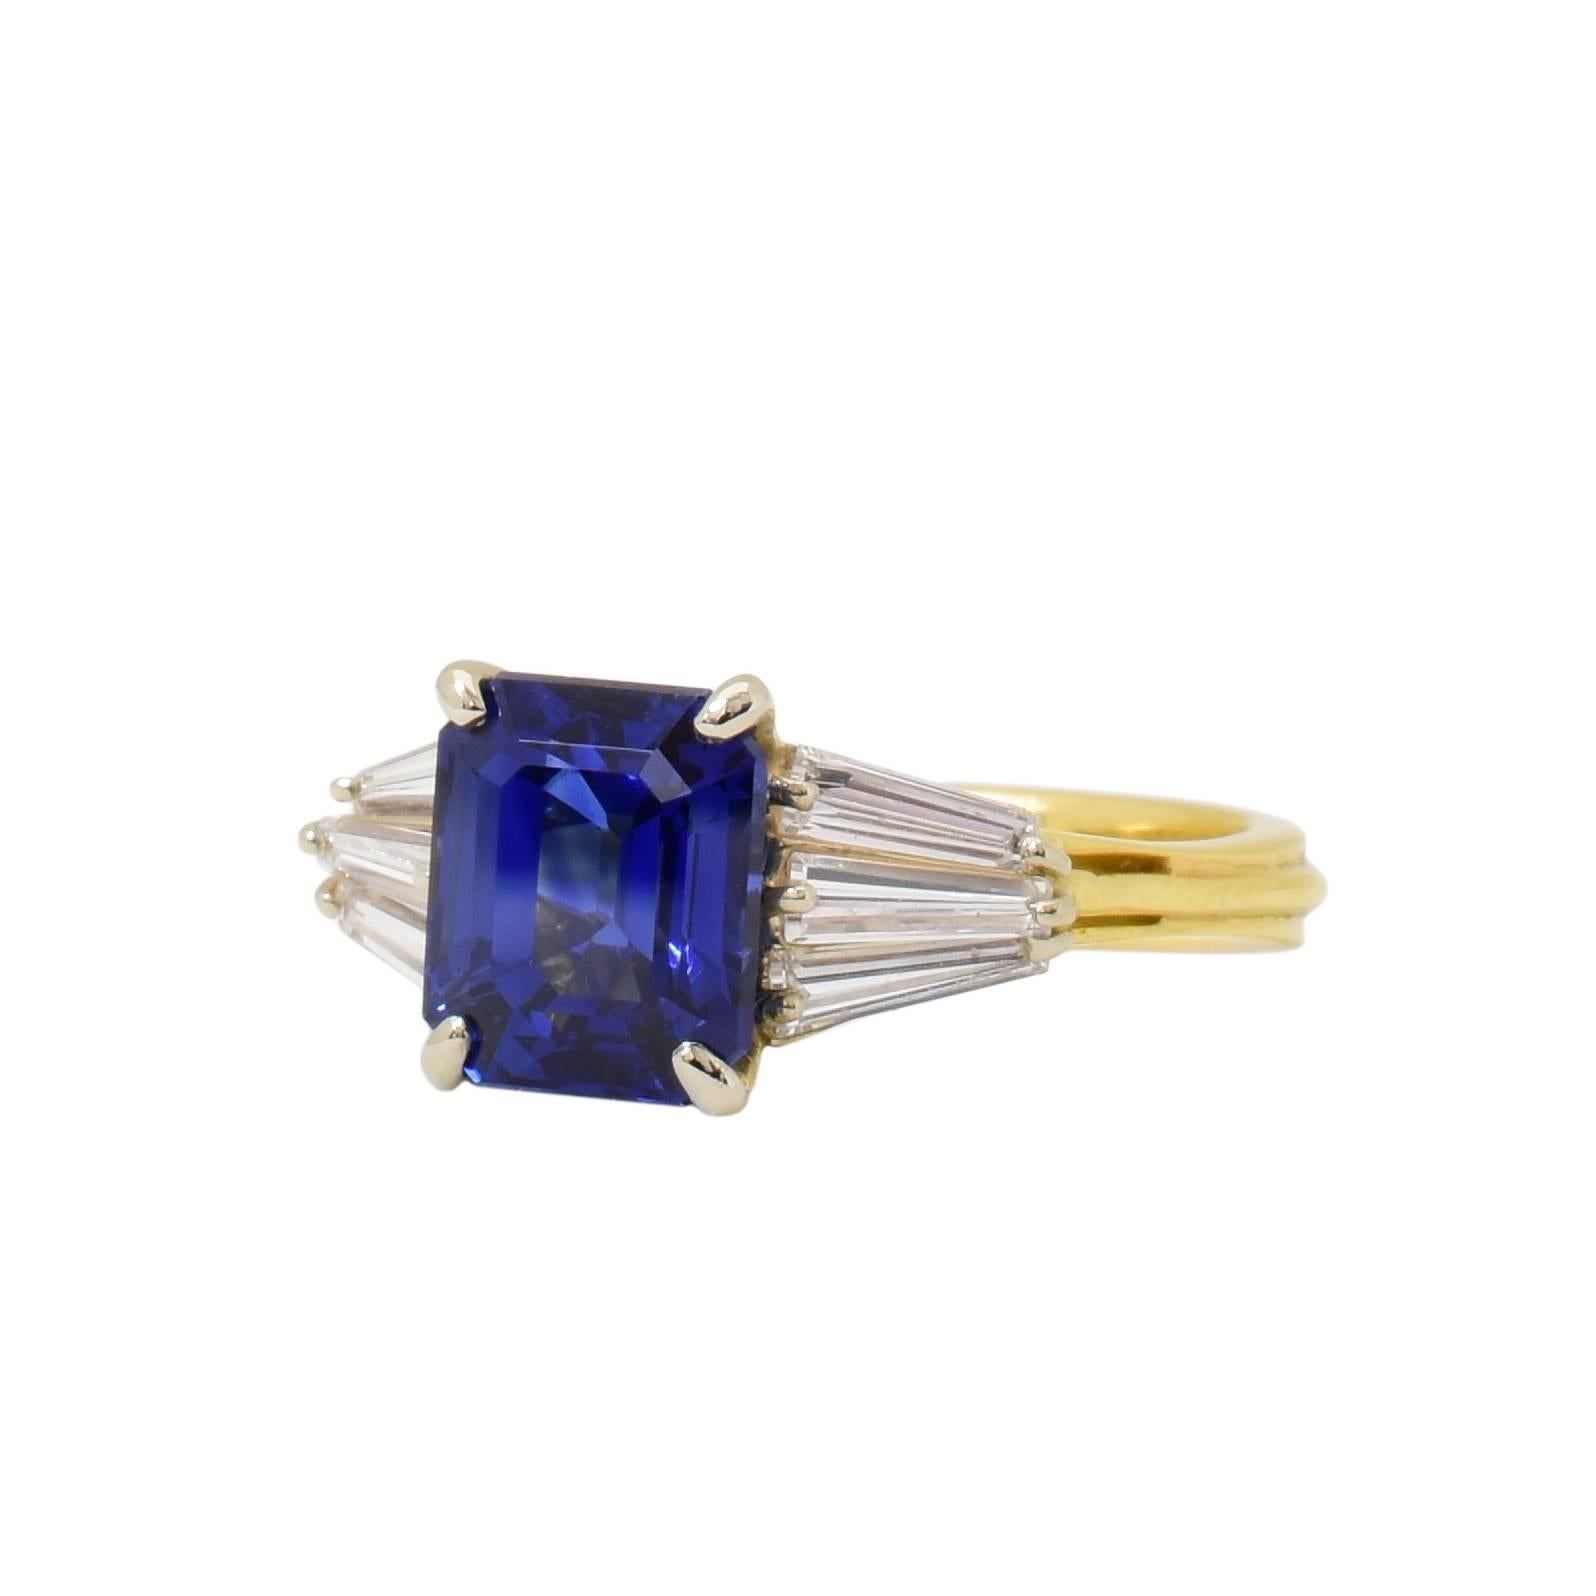 This 18k yellow gold ring features an AGL certified 3.77 carat blue sapphire center stone, with approximately .55 carats total weight of baguette cut diamonds, (3) on each side. The original American Gem Lab certificate is included.